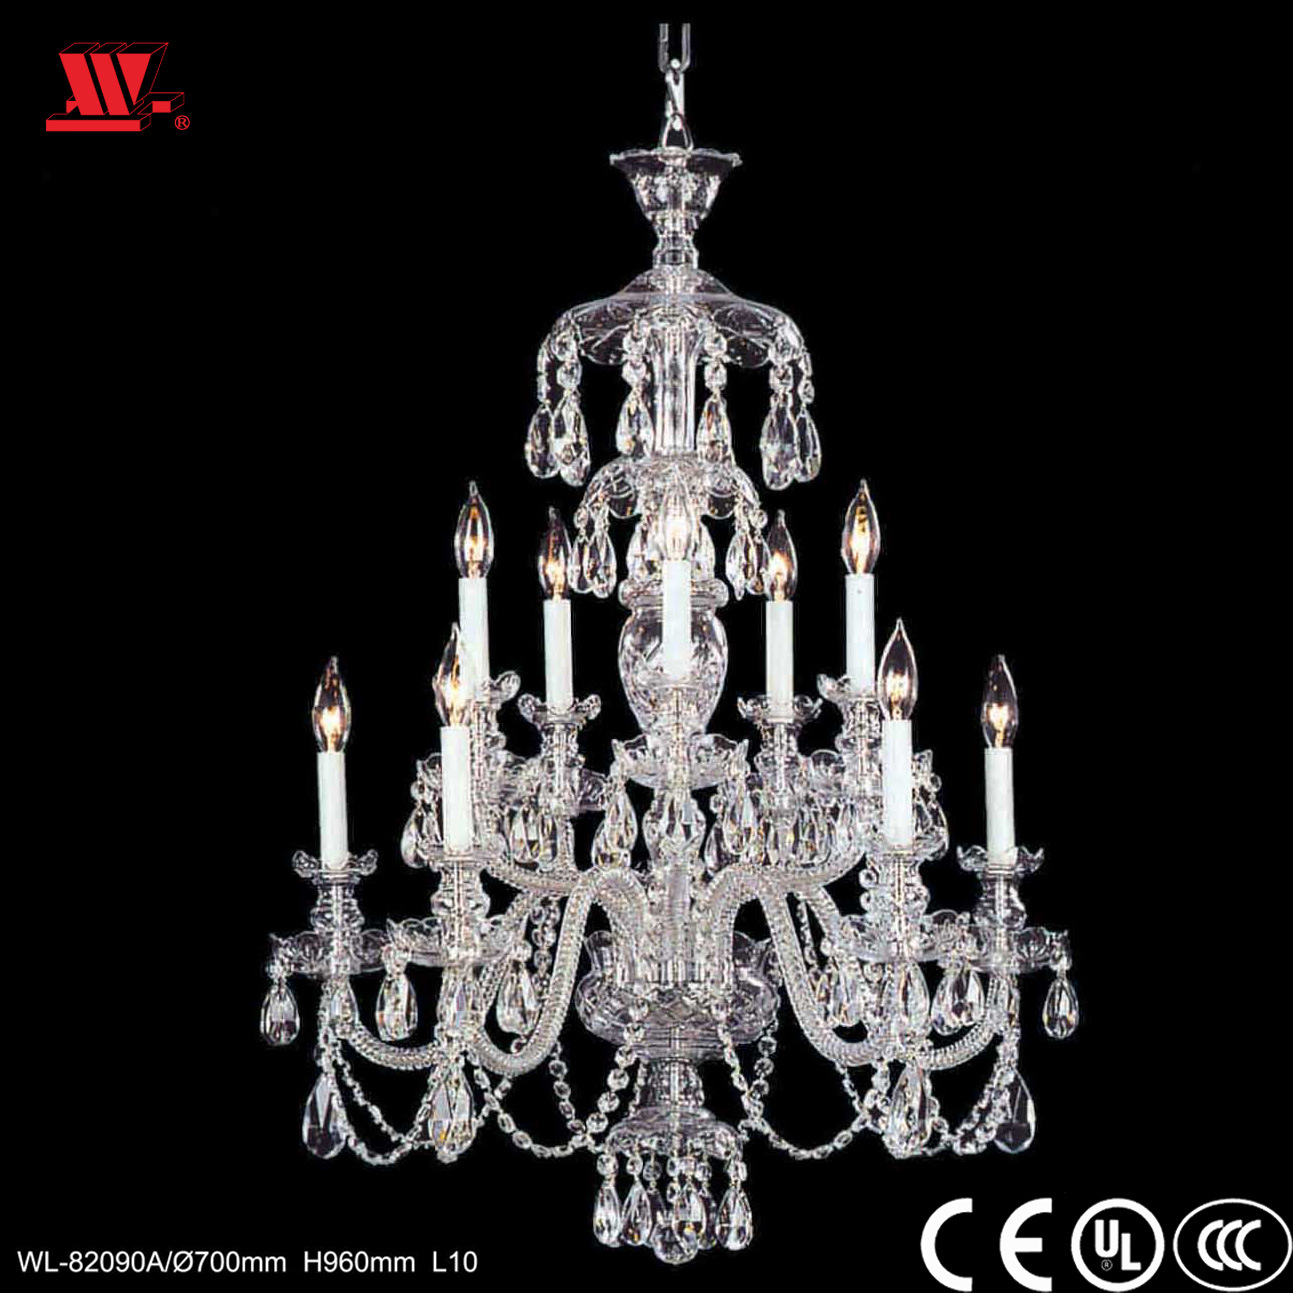 Crystal Chandelier with Glass Arms Wl-82090A